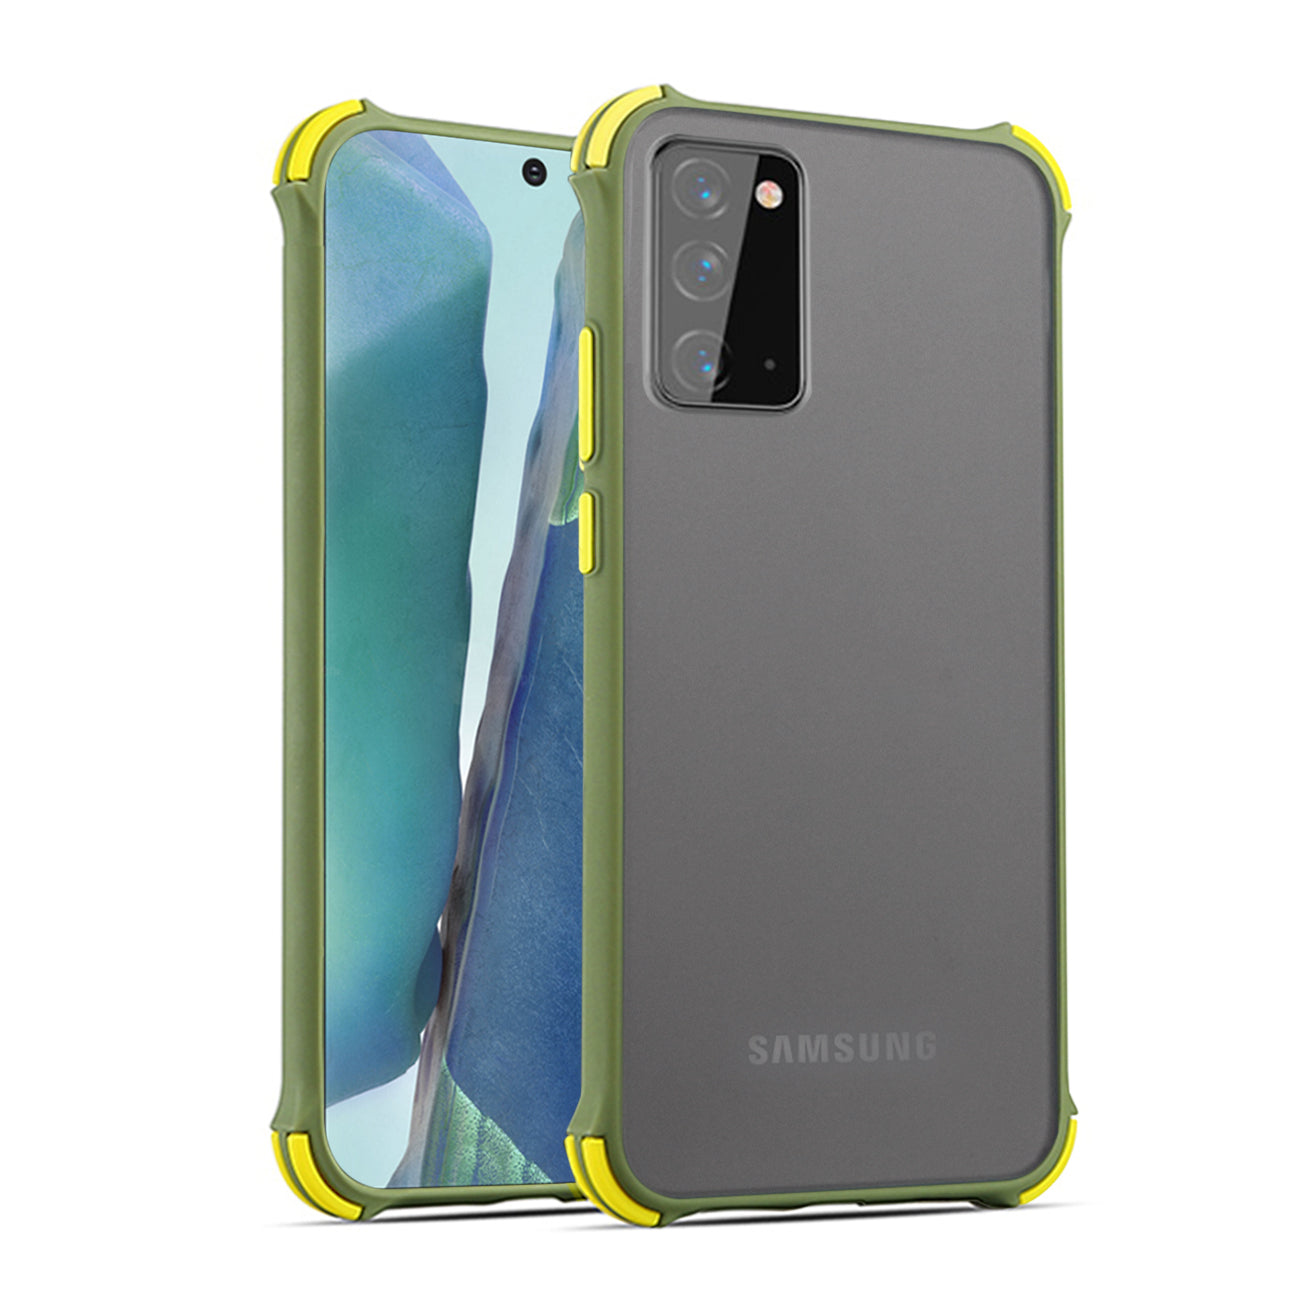 Bumper Case For SAMSUNG GALAXY NOTE 20 In Yellow